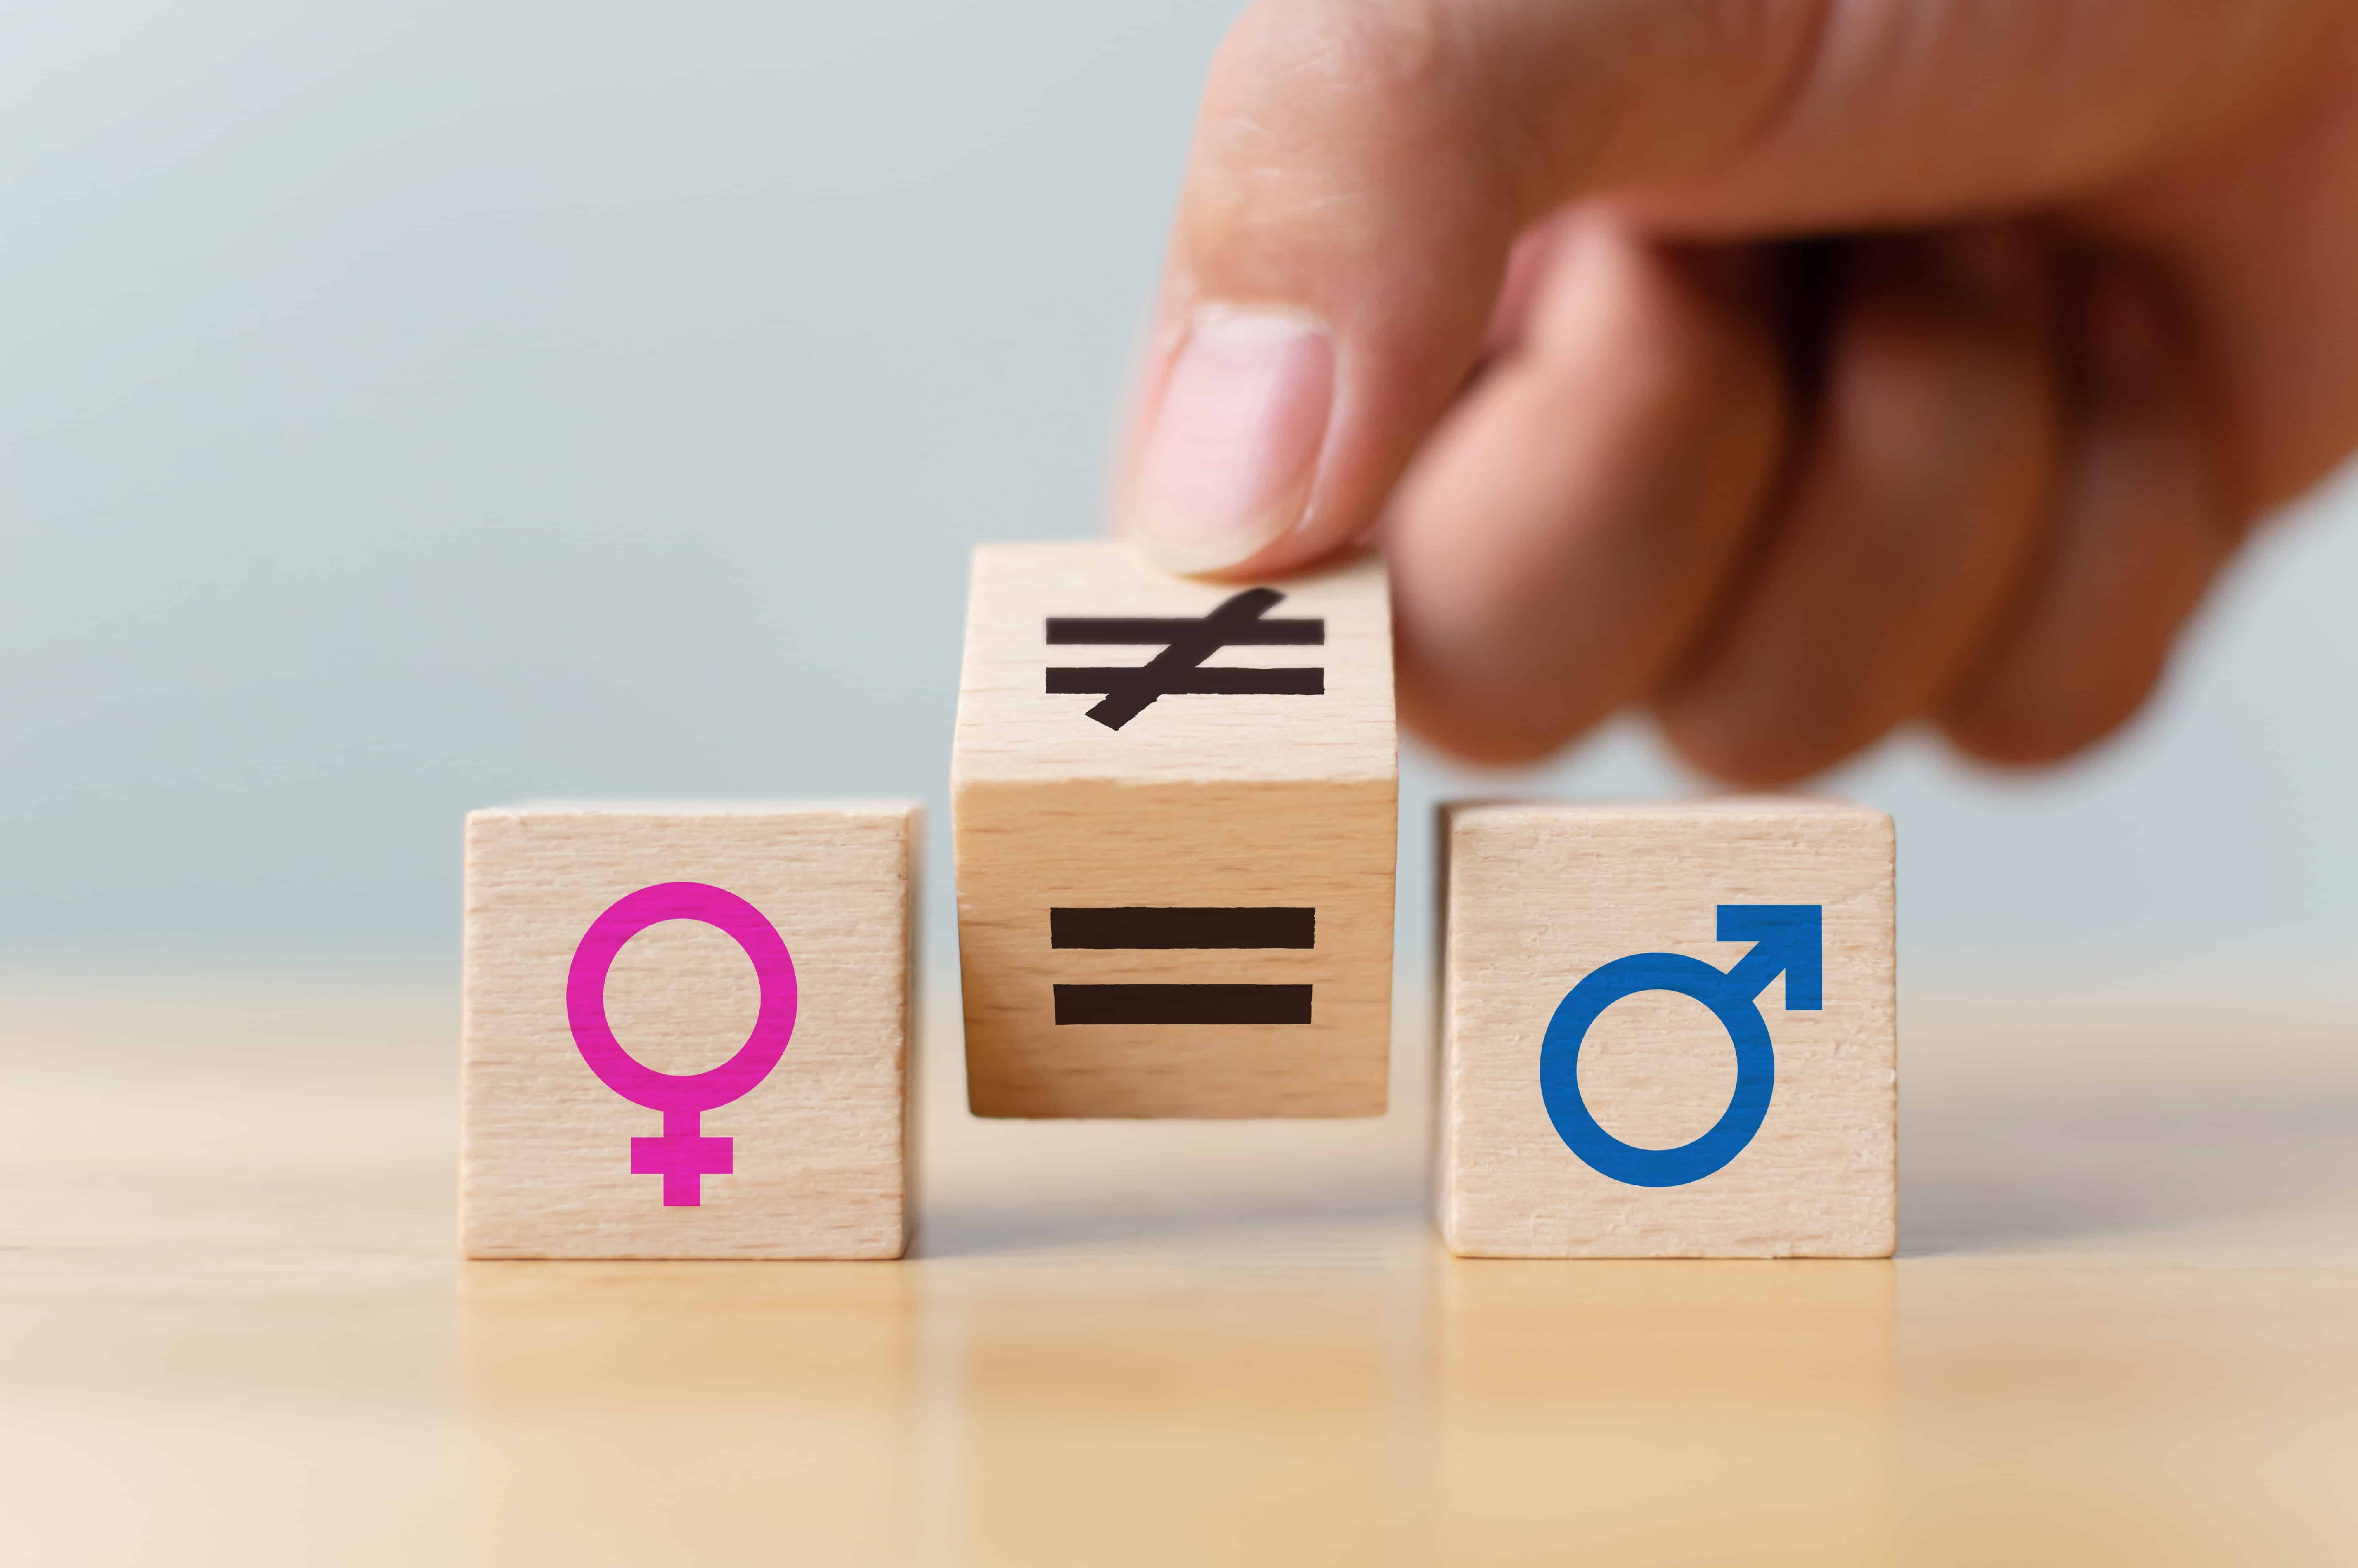 30 Important Gender Inequality Facts To Raise Awareness